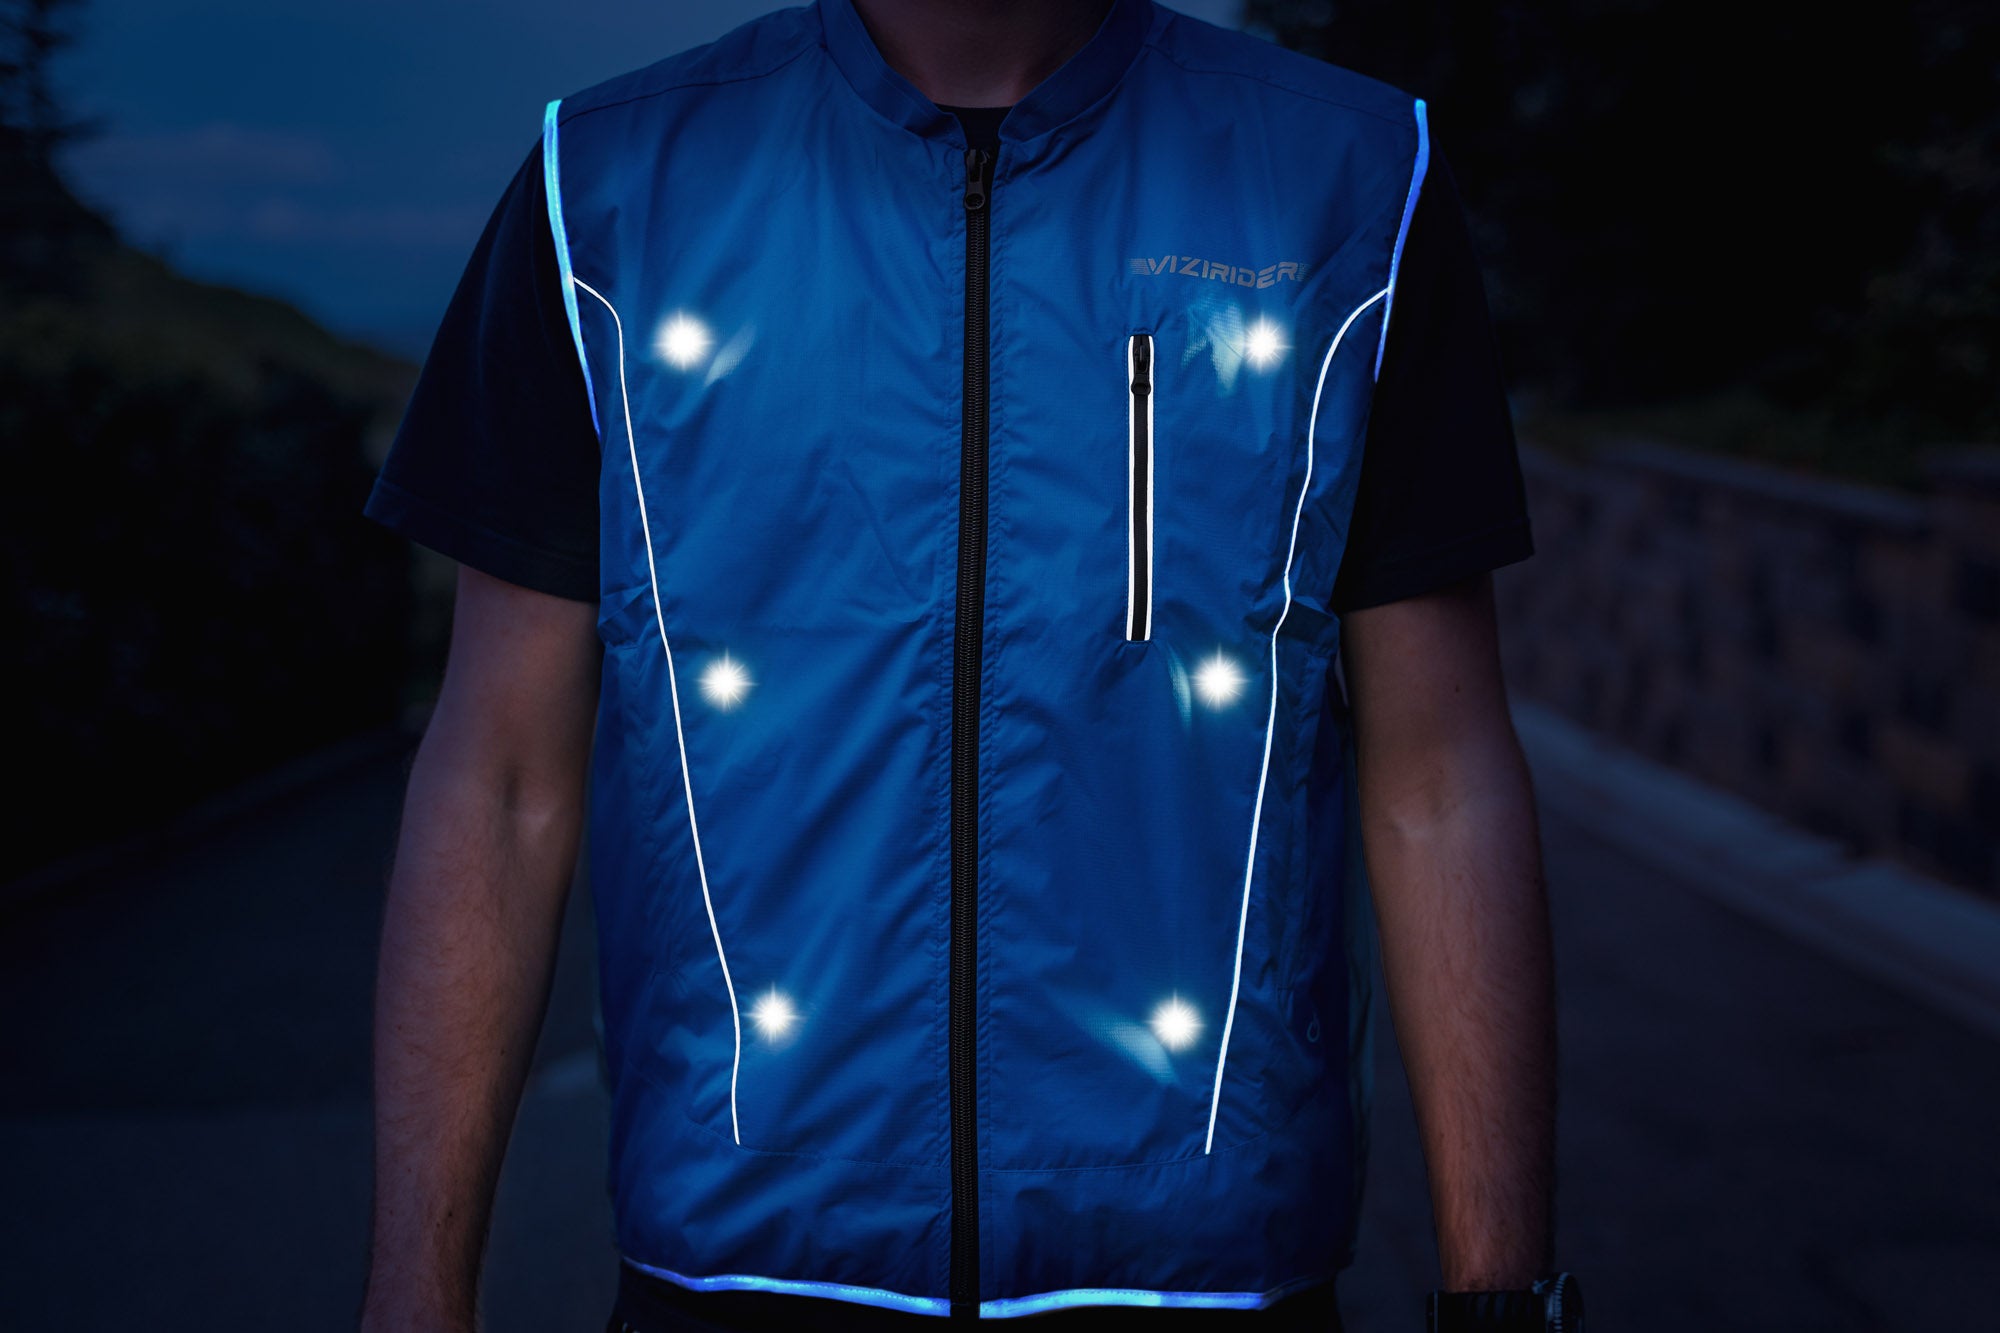 gilet with LED lights